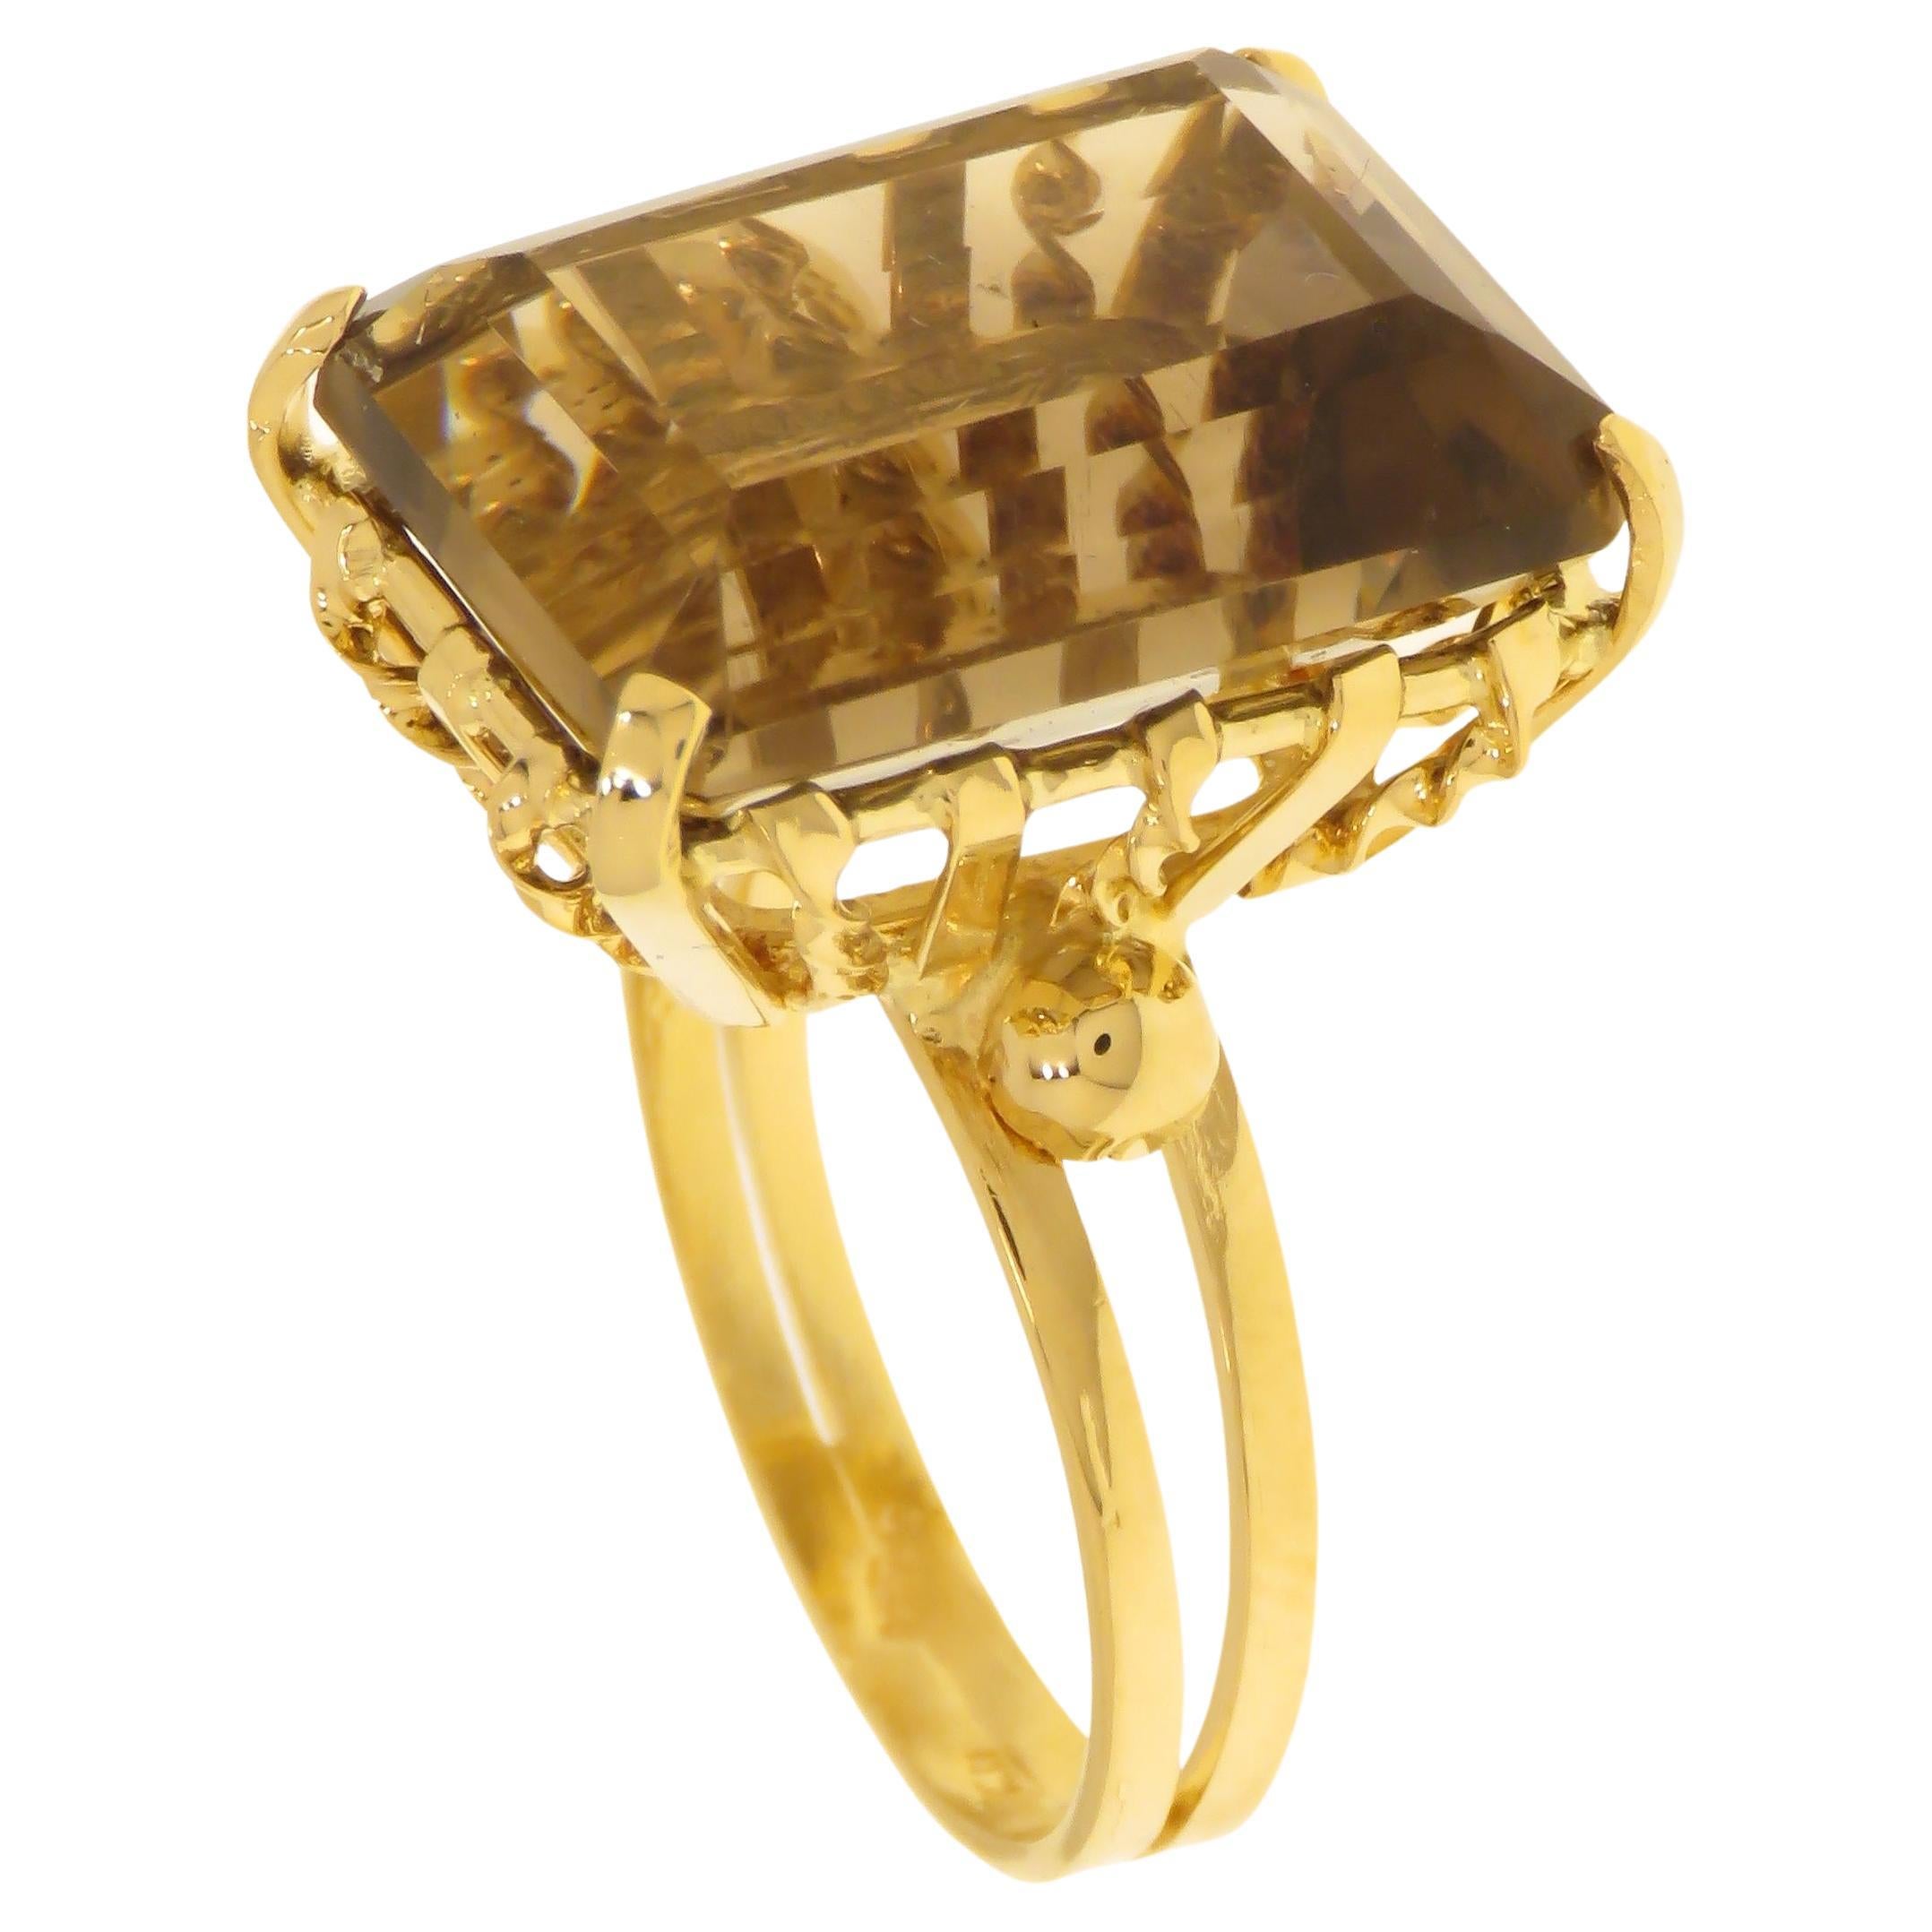 Brown Topaz 18 Karat Yellow Gold Vintage Cocktail Ring Handcrafted in Italy